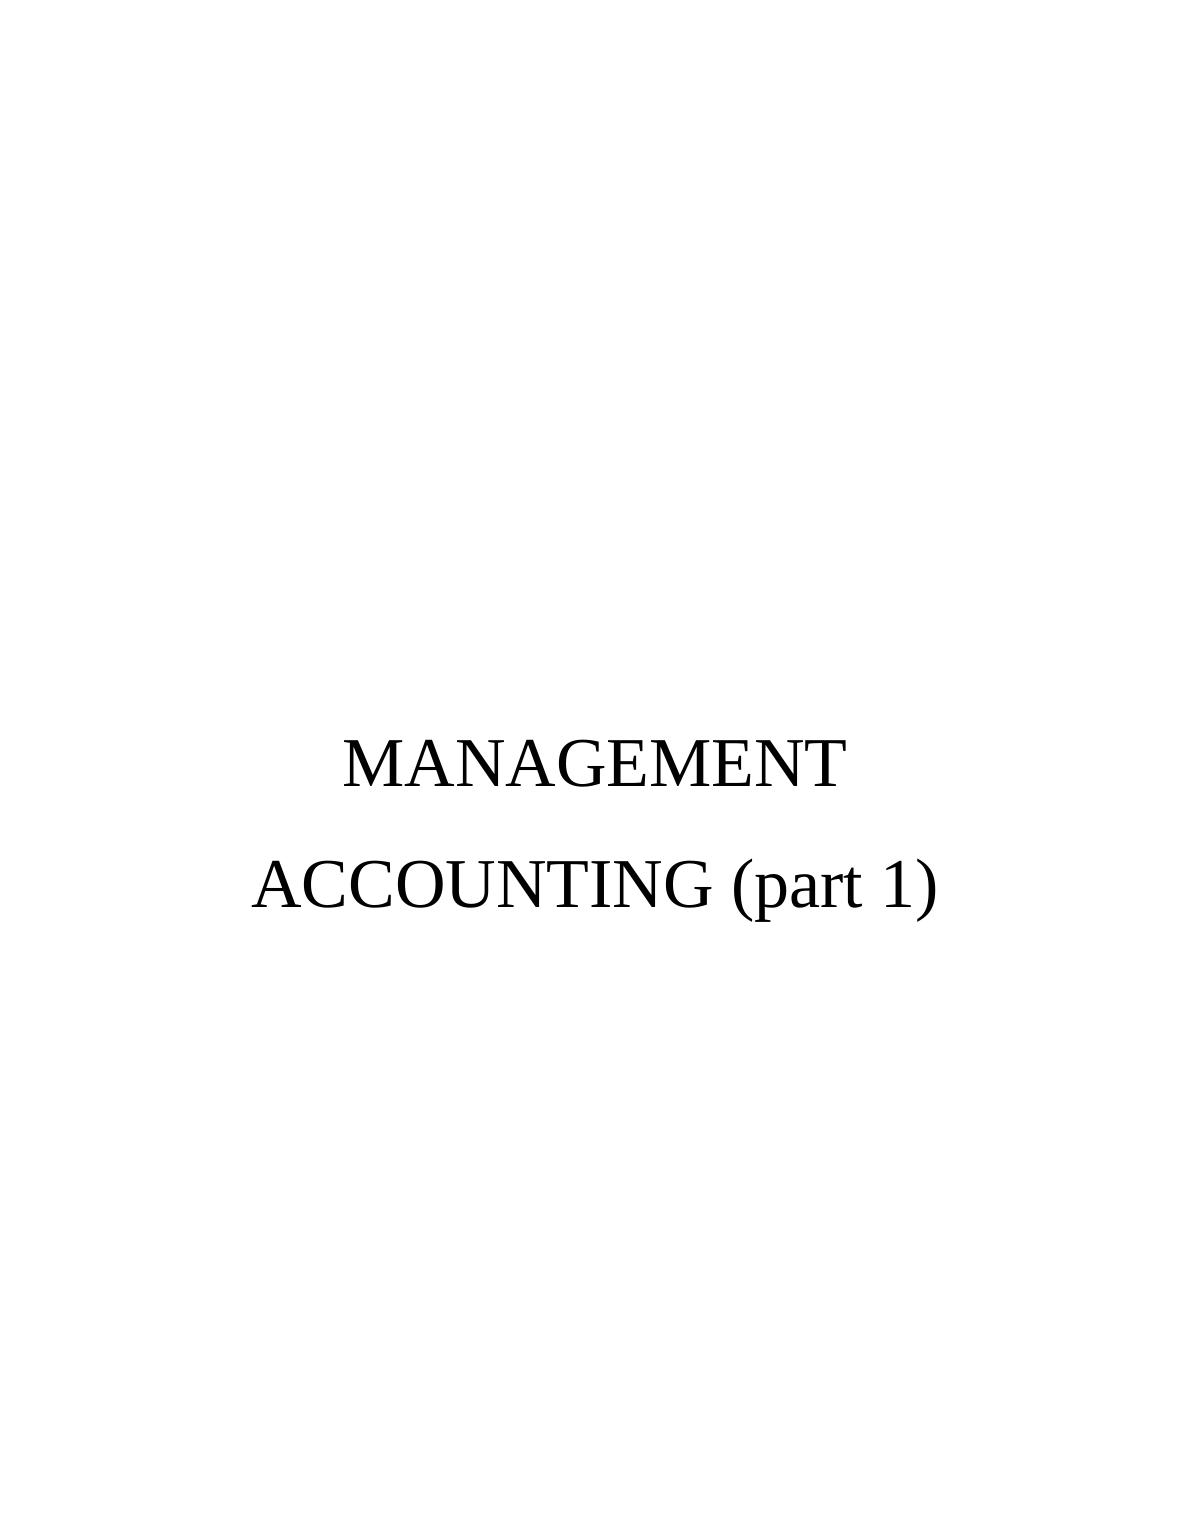 (MA ) Management Accounting Assignment_1